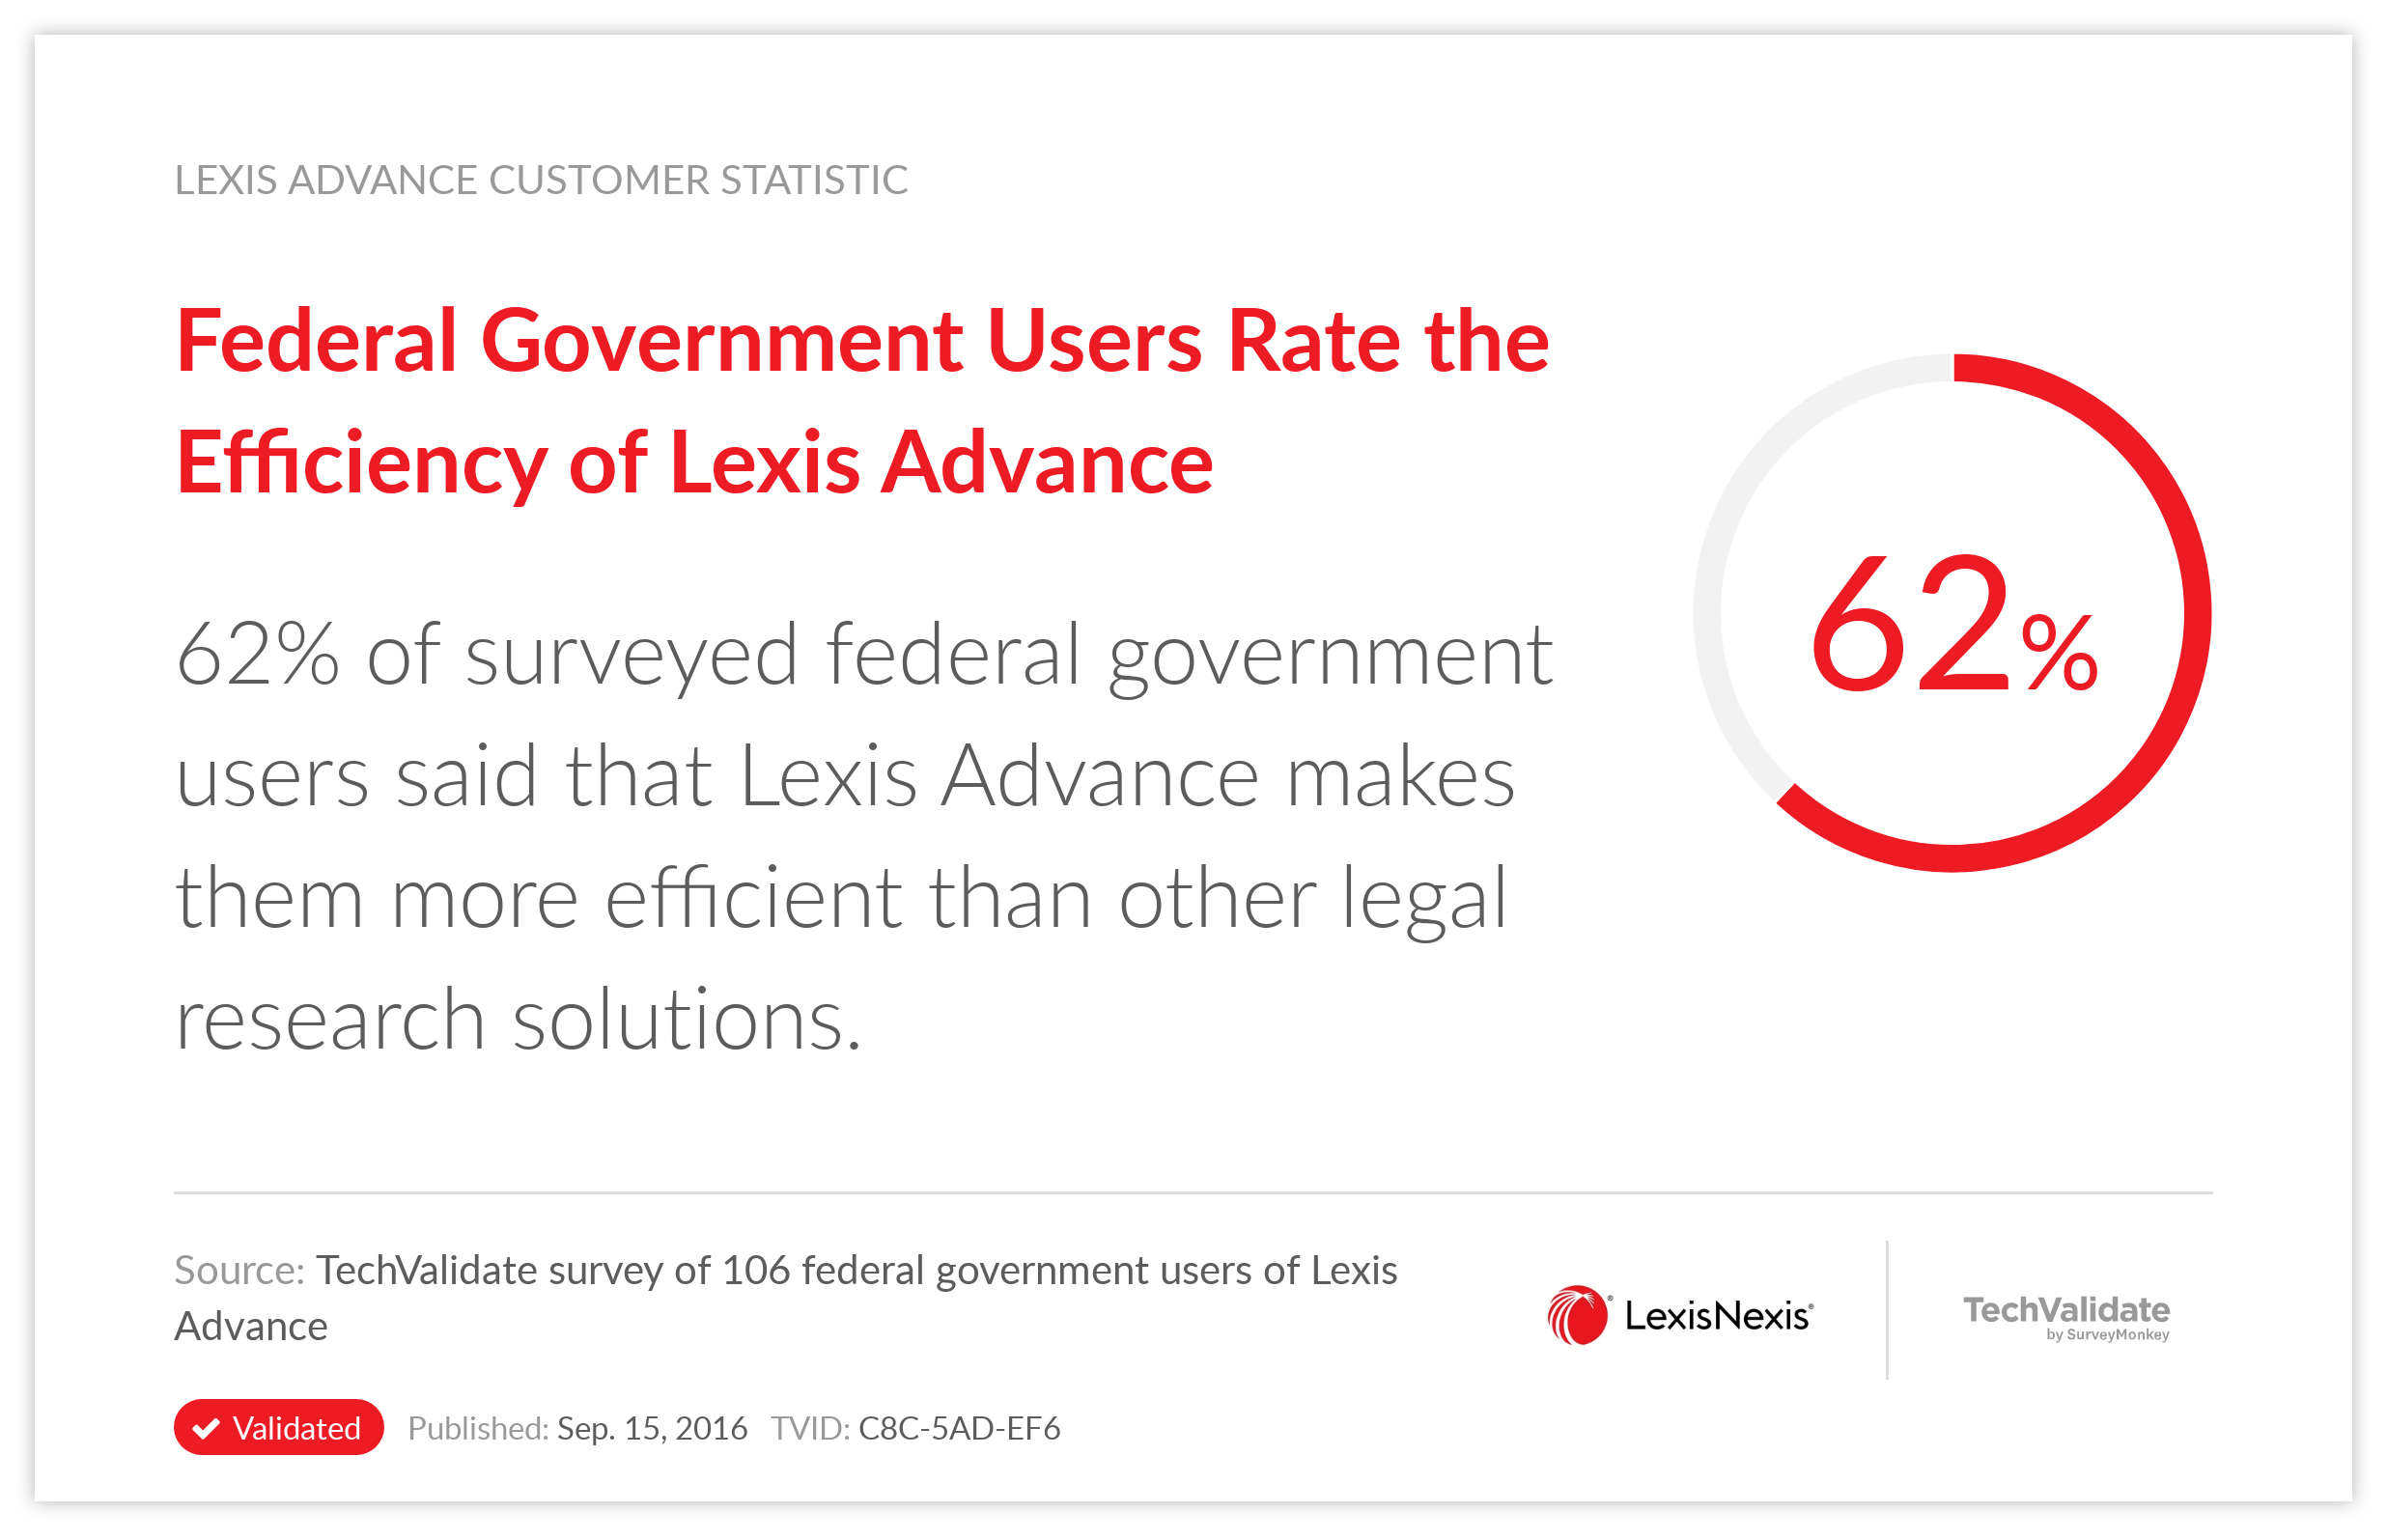 Federal Government Users Rate the Efficiency of Lexis Advance